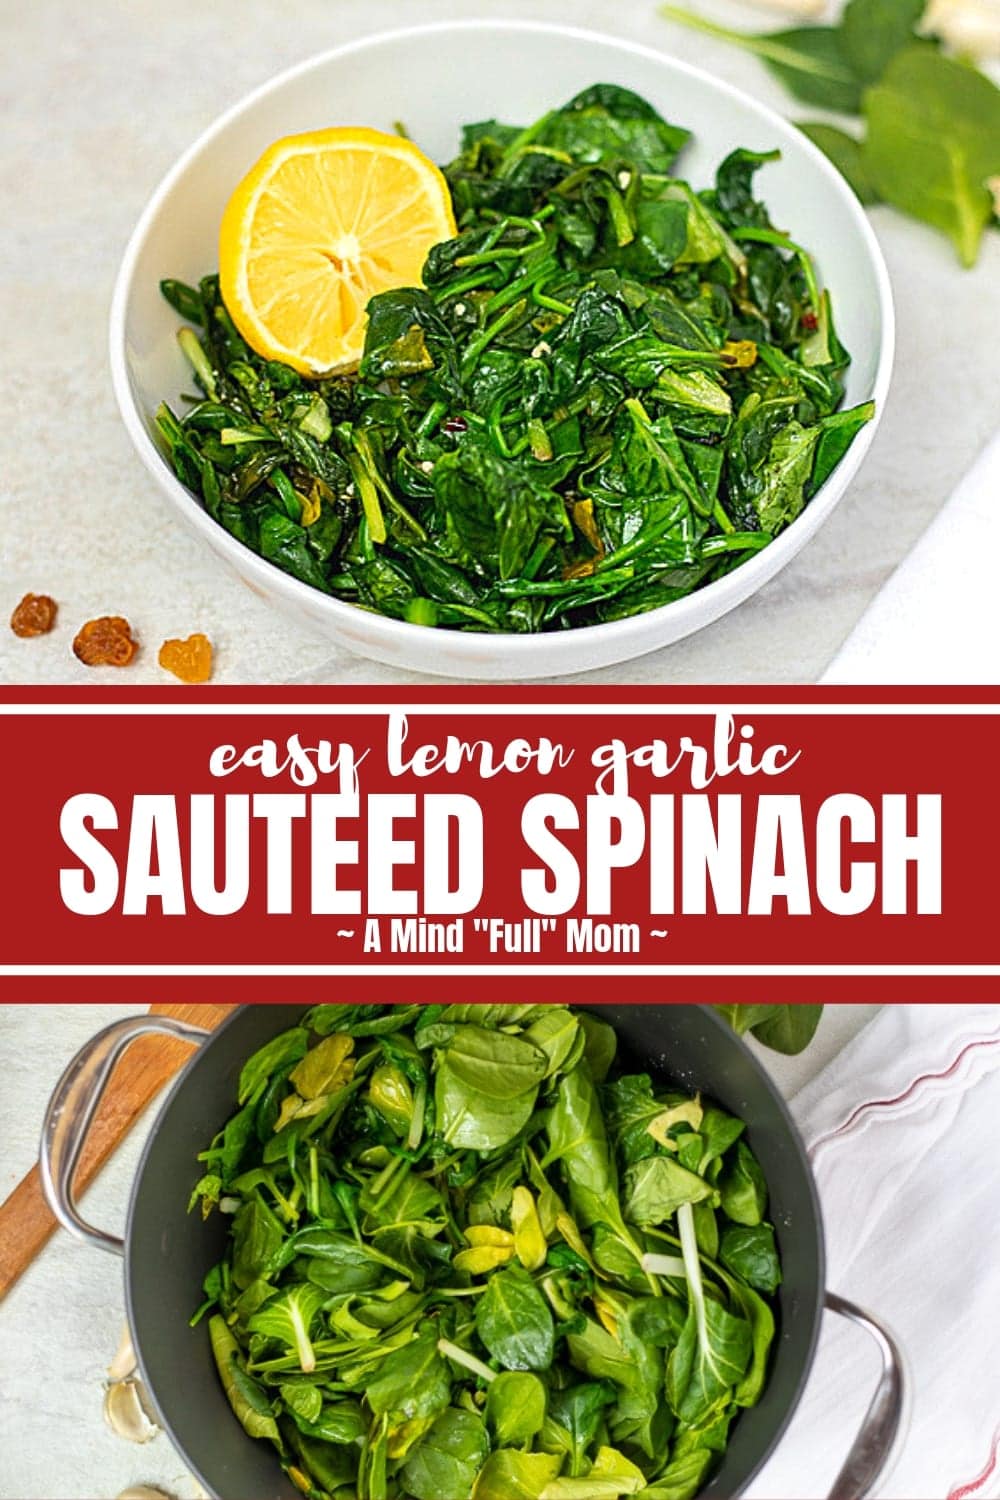 Sauteed Spinach is an easy and healthy side dish that can be made in just a few minutes with only a few ingredients. Dressed up with golden raisins, garlic, red pepper flakes, and lemon, this sauteed spinach recipe is anything but bland. 